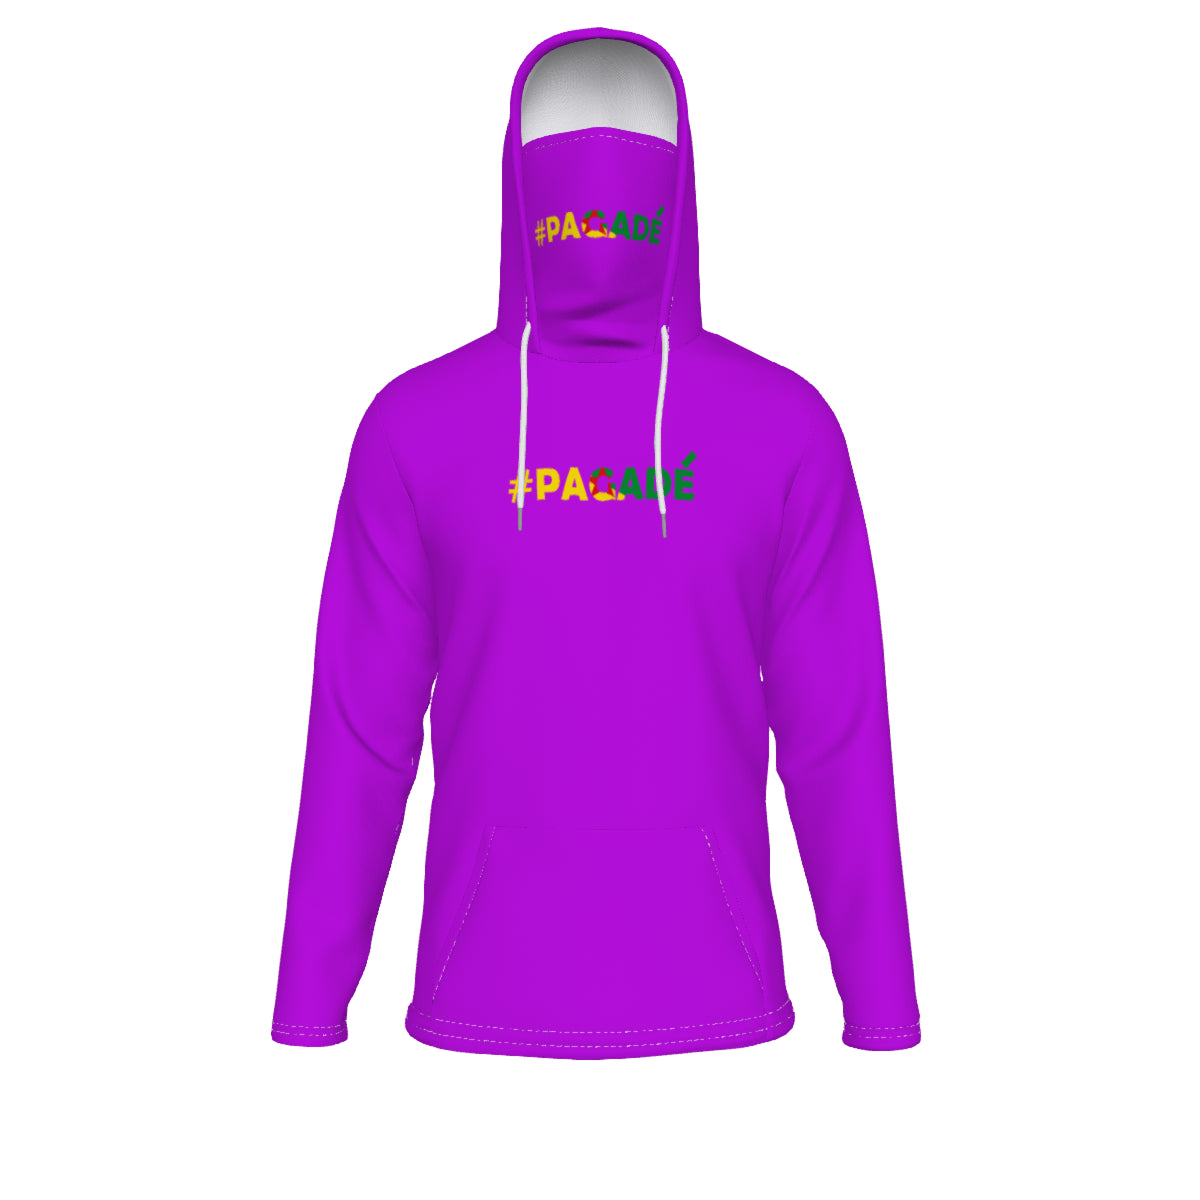 #PAGADE PRPLE Unisex Pullover Hoodie With Mask